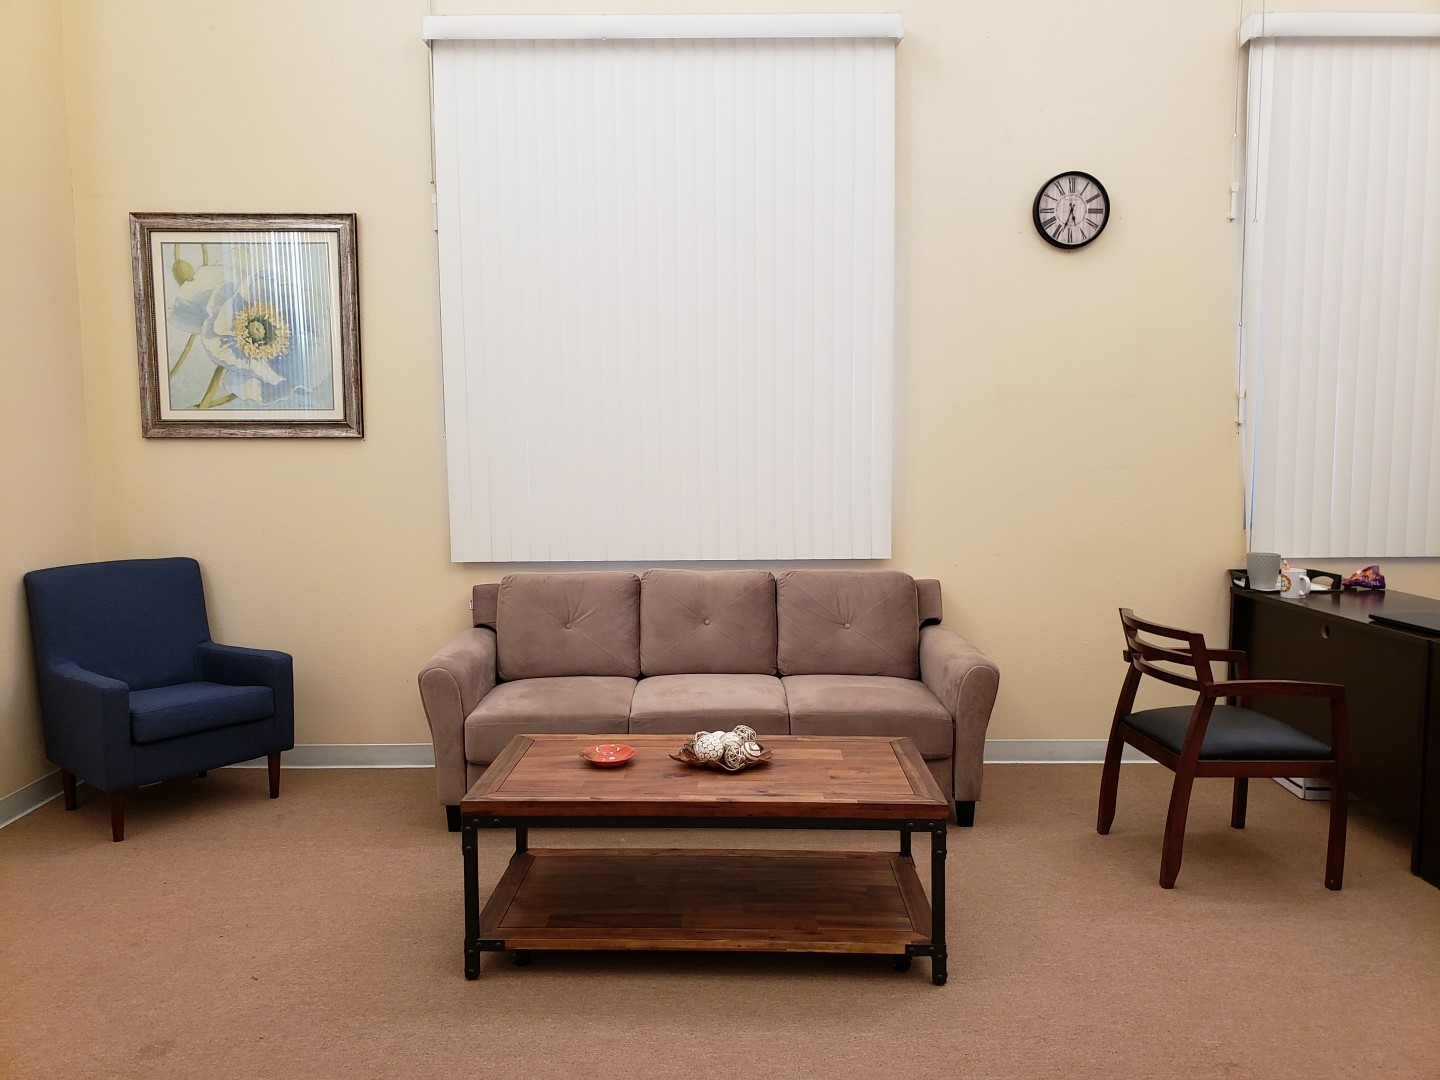 Lobby area with a sofa chair, couch, coffee table, and reception desk. There are two windows with vertical blinds. On the wall there is a clock and a painting, and the floor is carpeted.